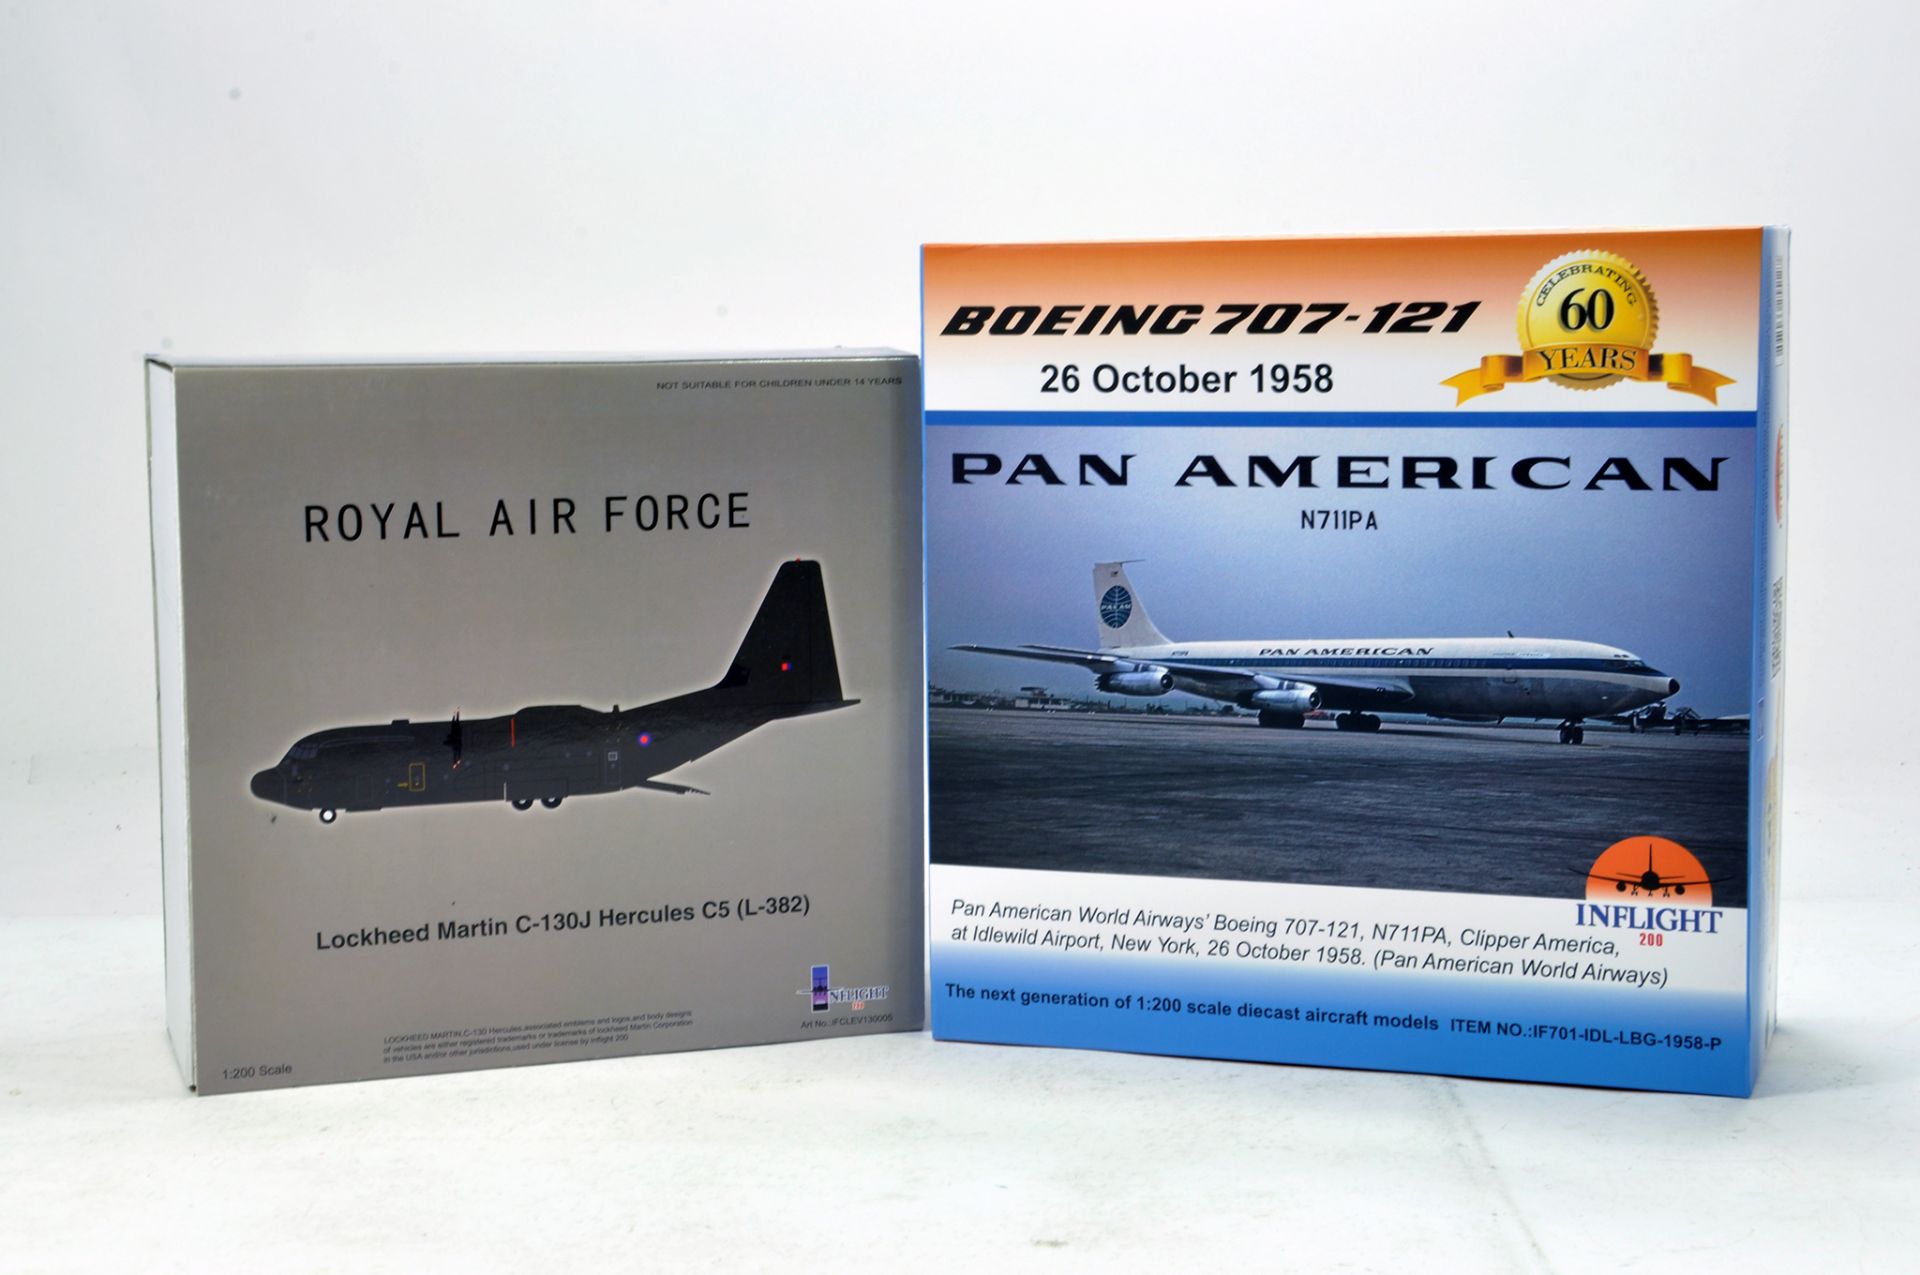 Inflight Models Diecast Aircraft Duo comprising Boeing 707 Special Edition plus C-130 Hercules